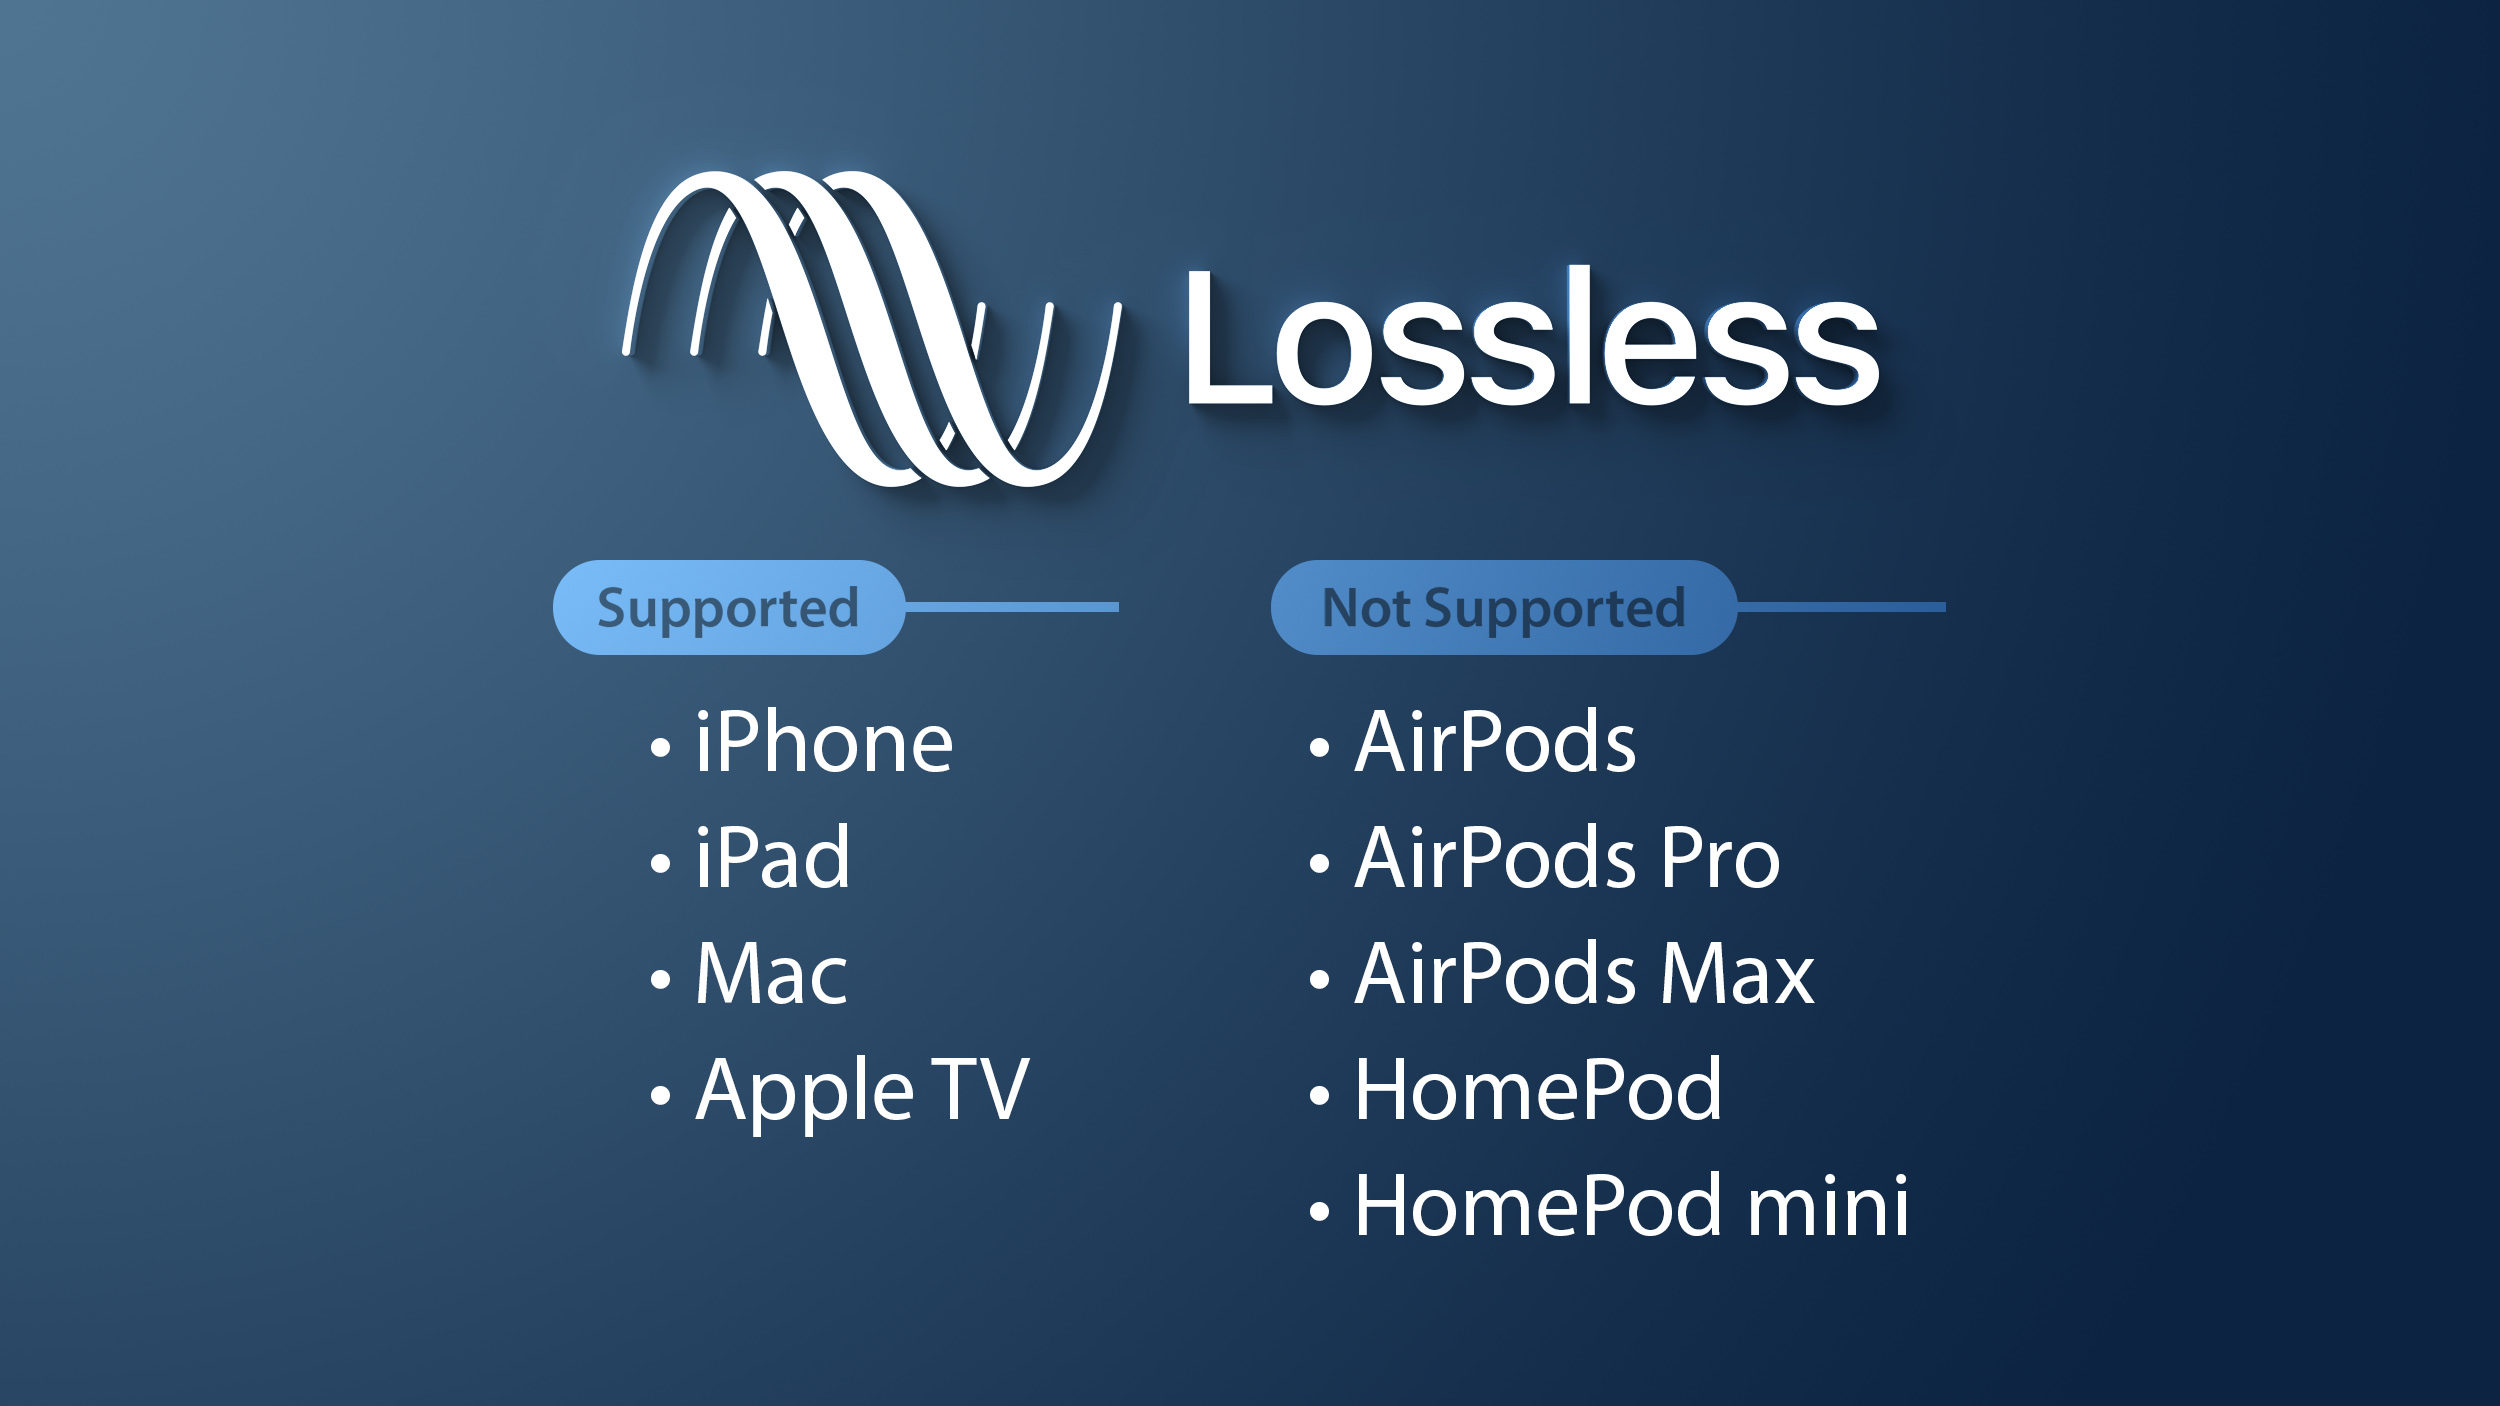 Apple TV Won't Support Hi-Res Lossless at Launch, AirPods Max Wired  Playback 'Will Not Be Completely Lossless' - MacRumors